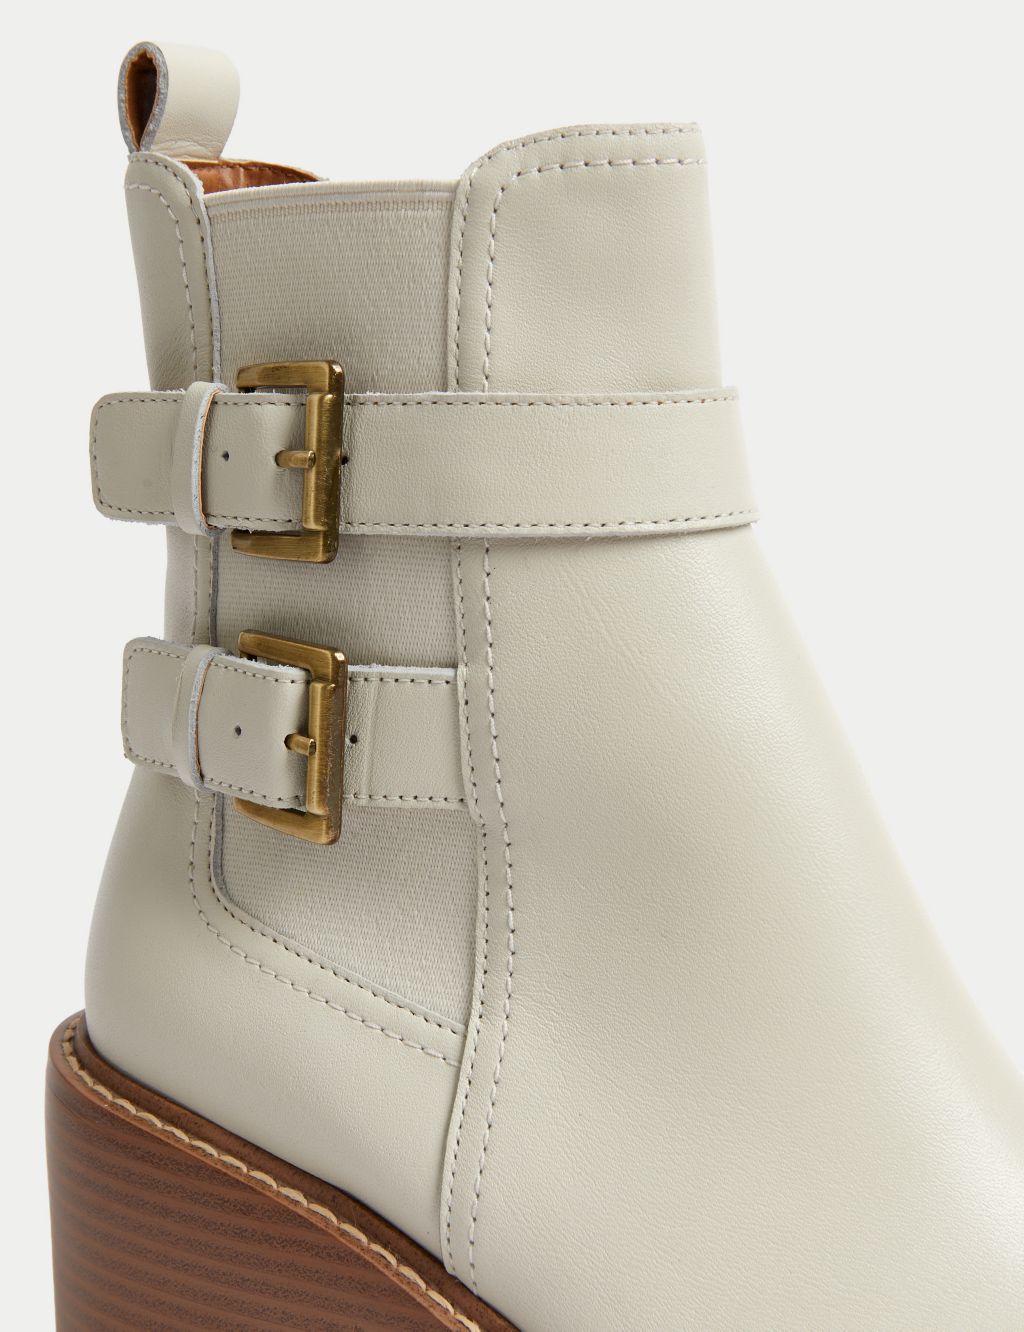 Leather Buckle Block Heel Ankle Boots image 3